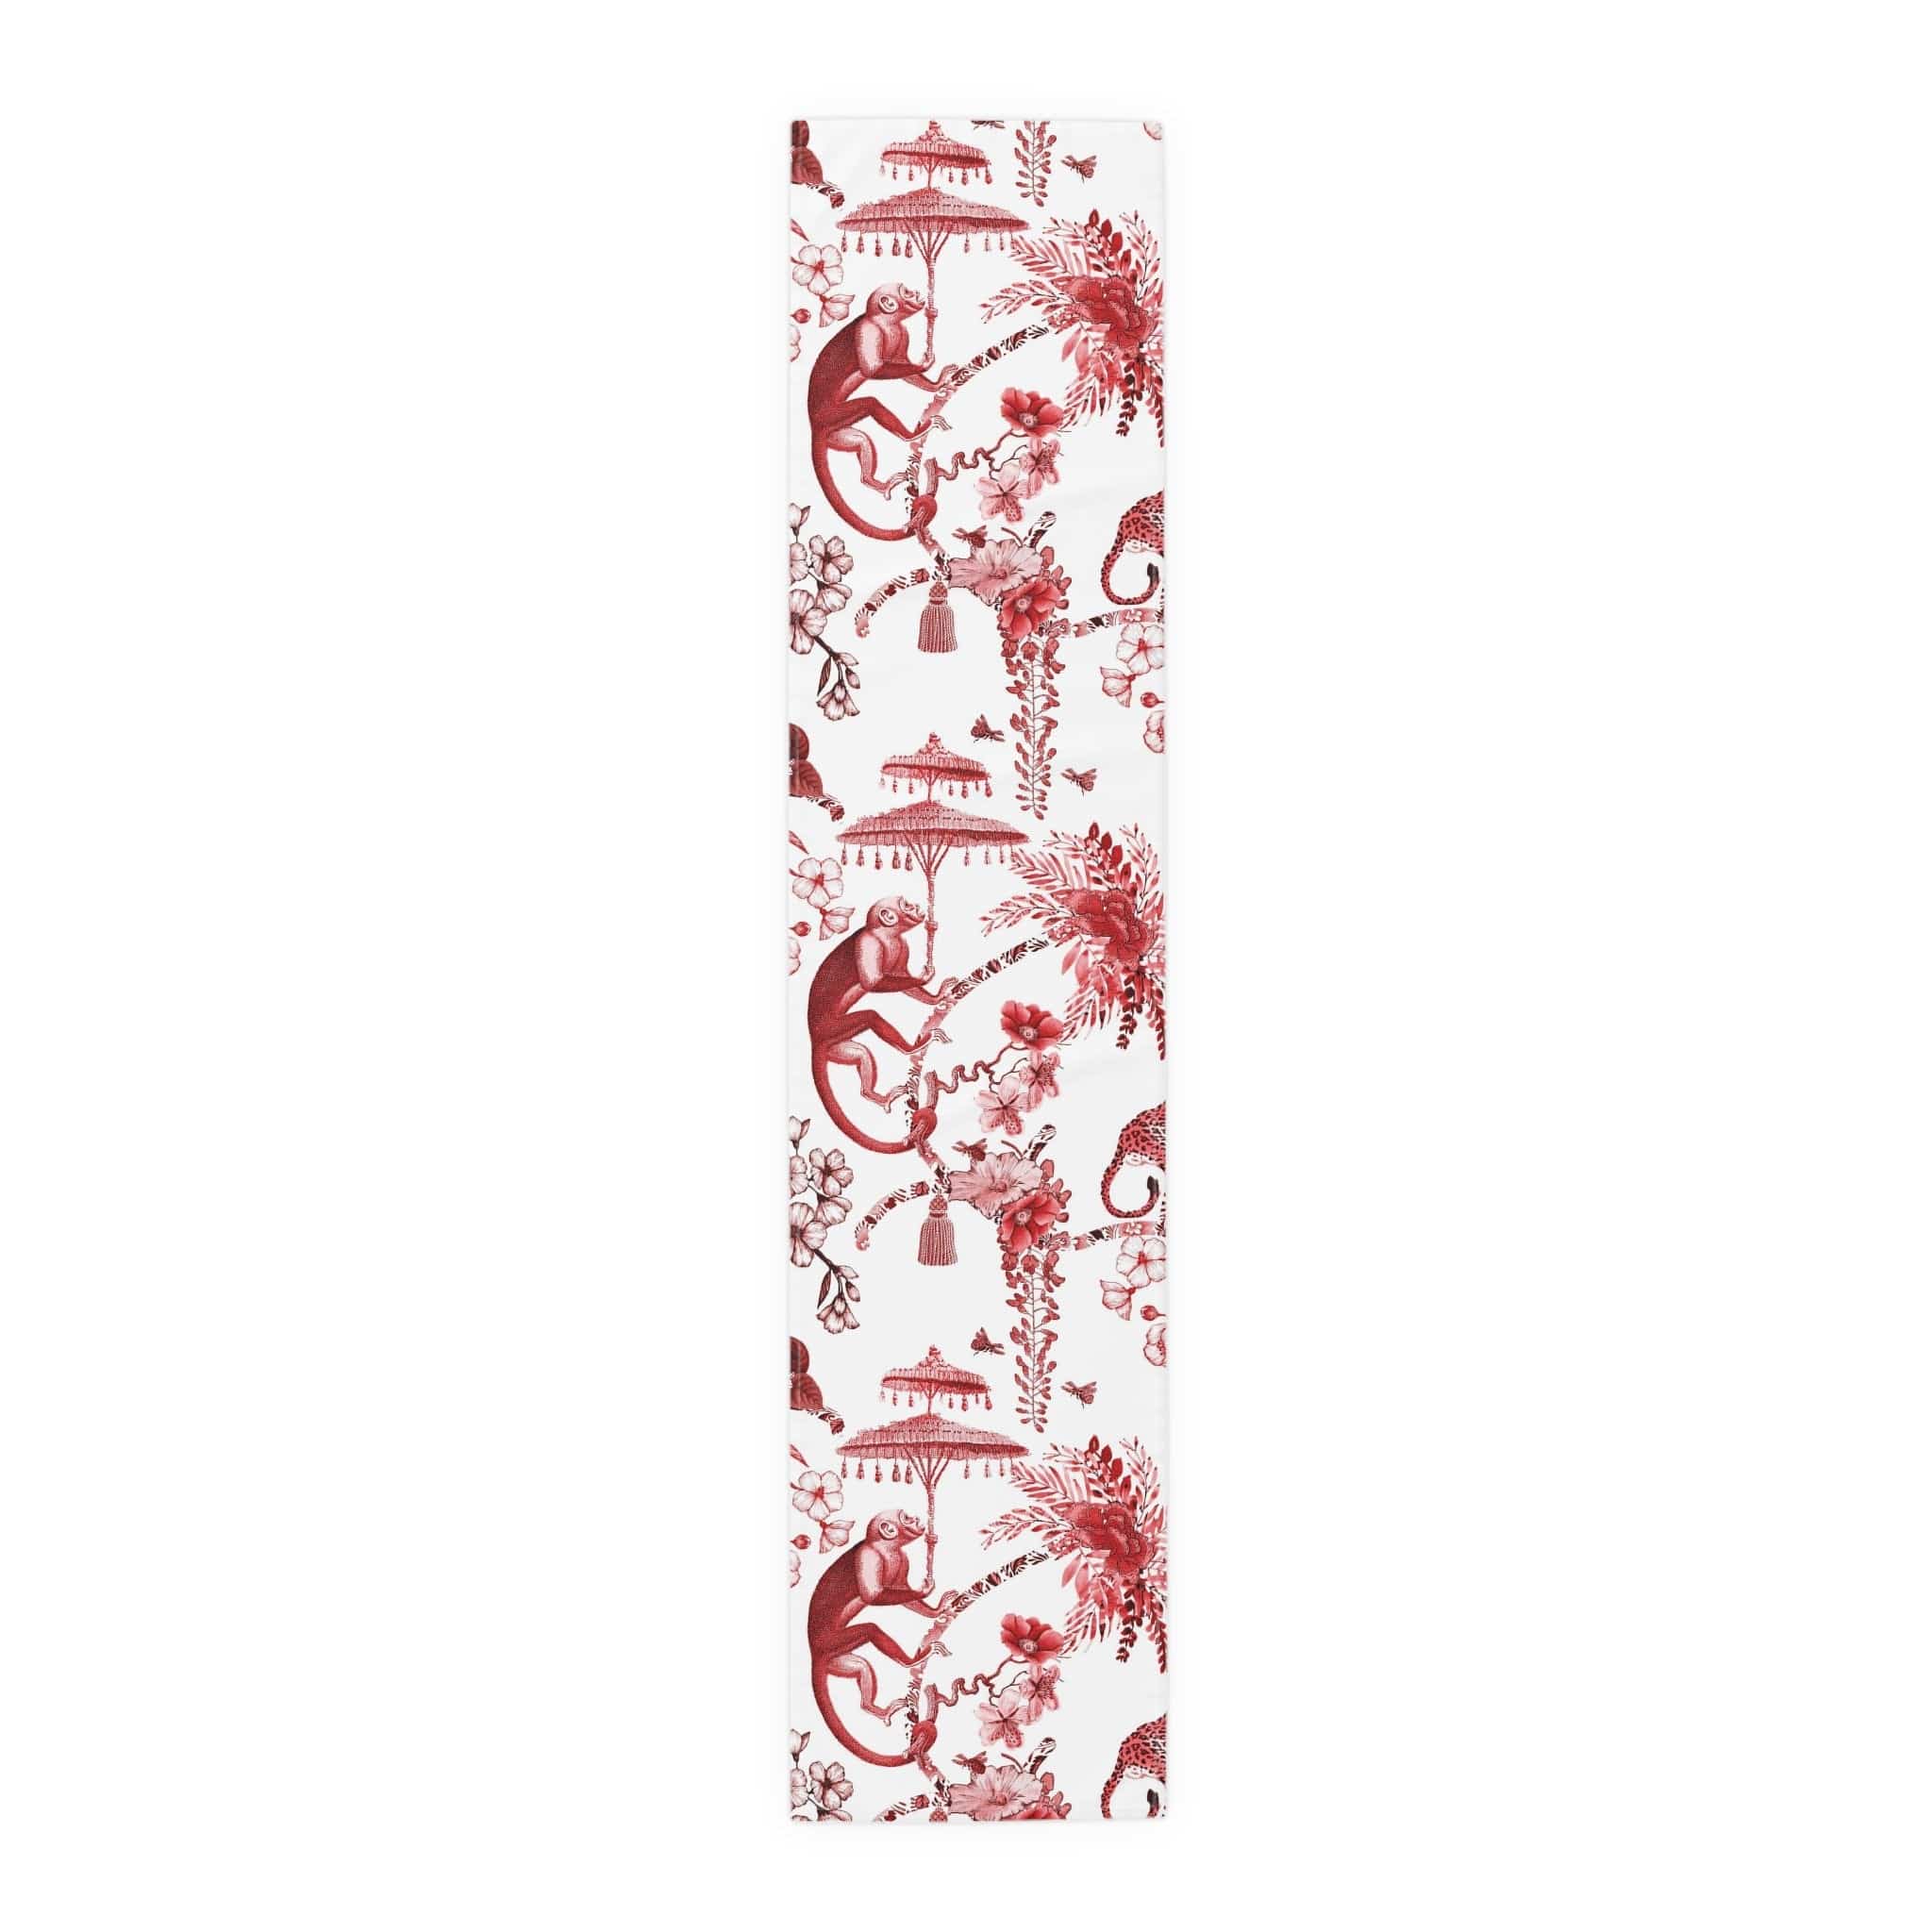 Kate McEnroe New York Chinoiserie Jungle Botanical Toile Table Runner, Red, White Chinoiserie Floral Table Linens , Country Farmhouse Table Decor - 131782623 Table Runners